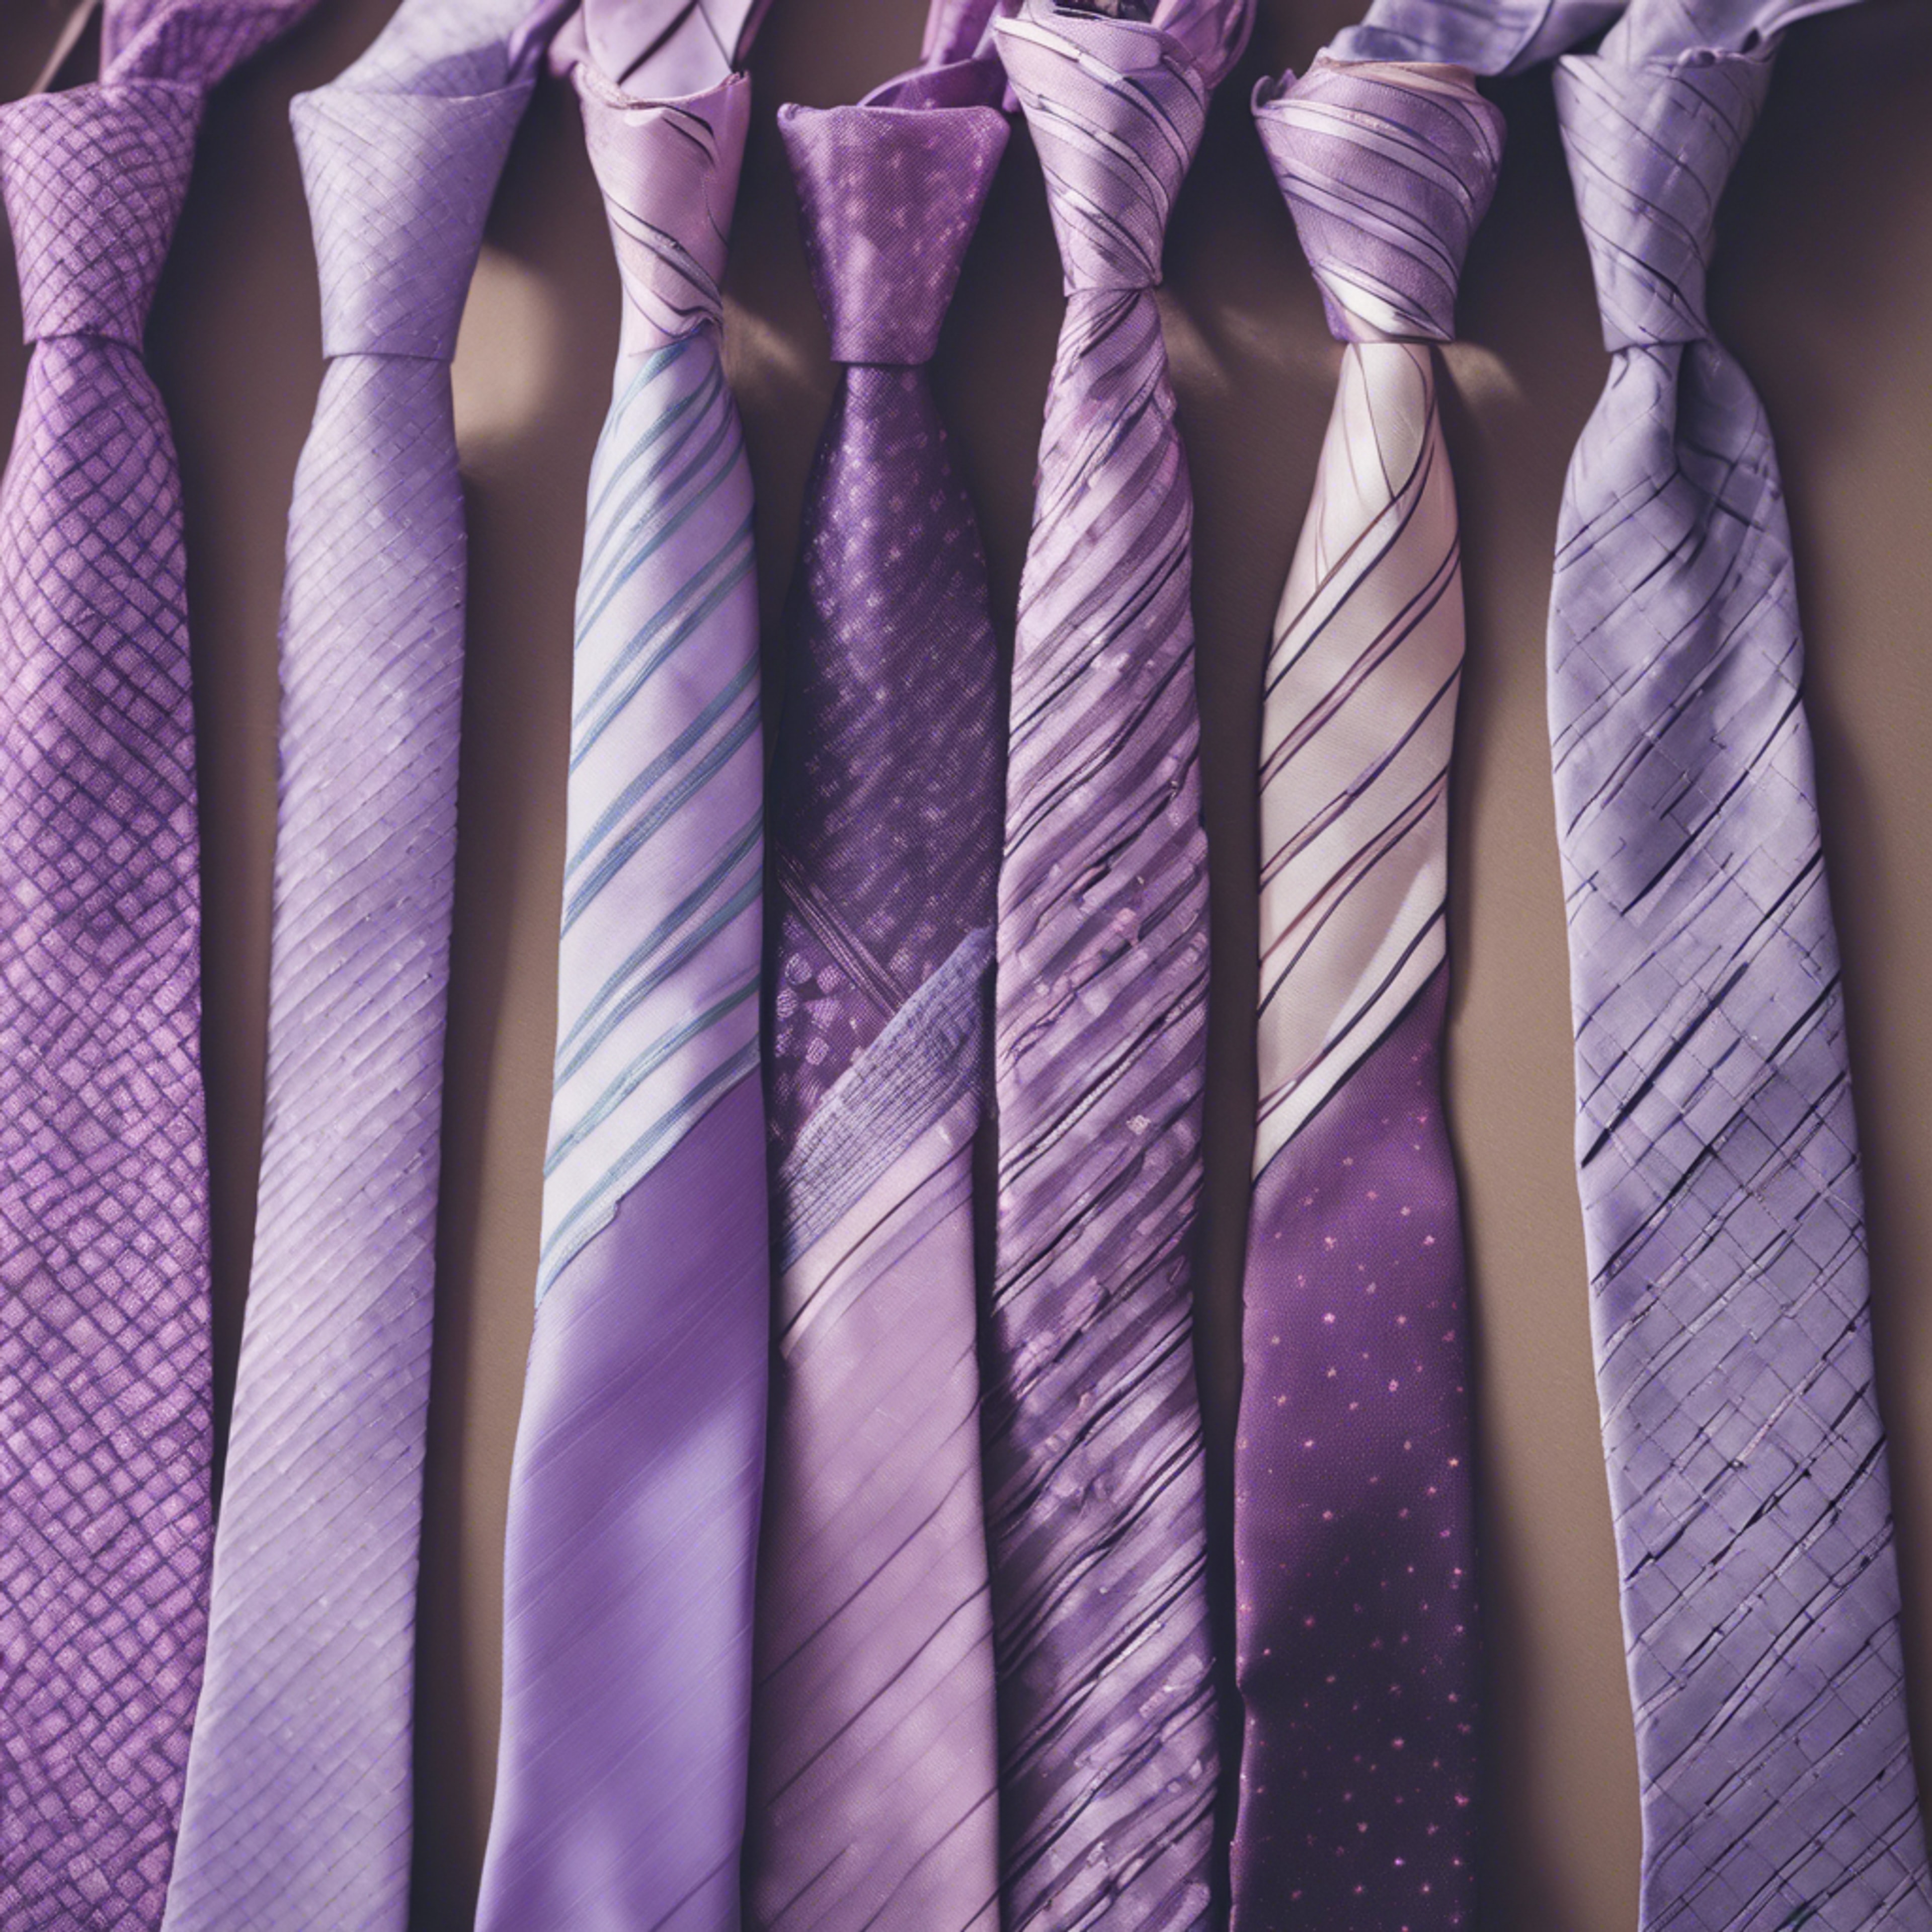 An array of preppy lilac ties, neatly arranged in a bright retail clothing store.壁紙[7f22e8295f7a42fc88bd]